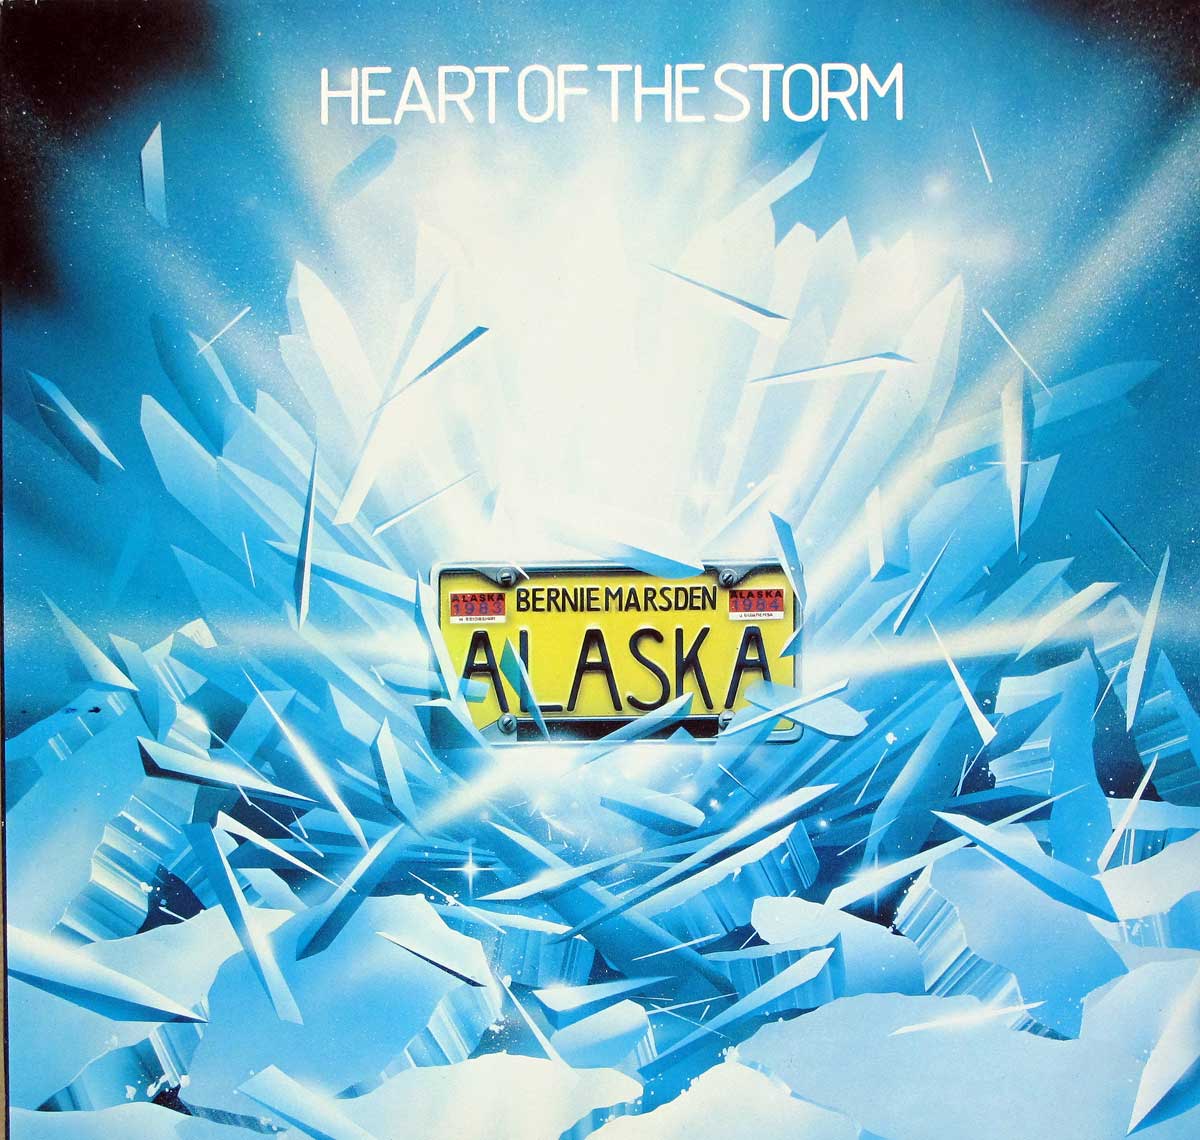 High Resolution Photo Album Front Cover of Heart of the Storm https://vinyl-records.nl